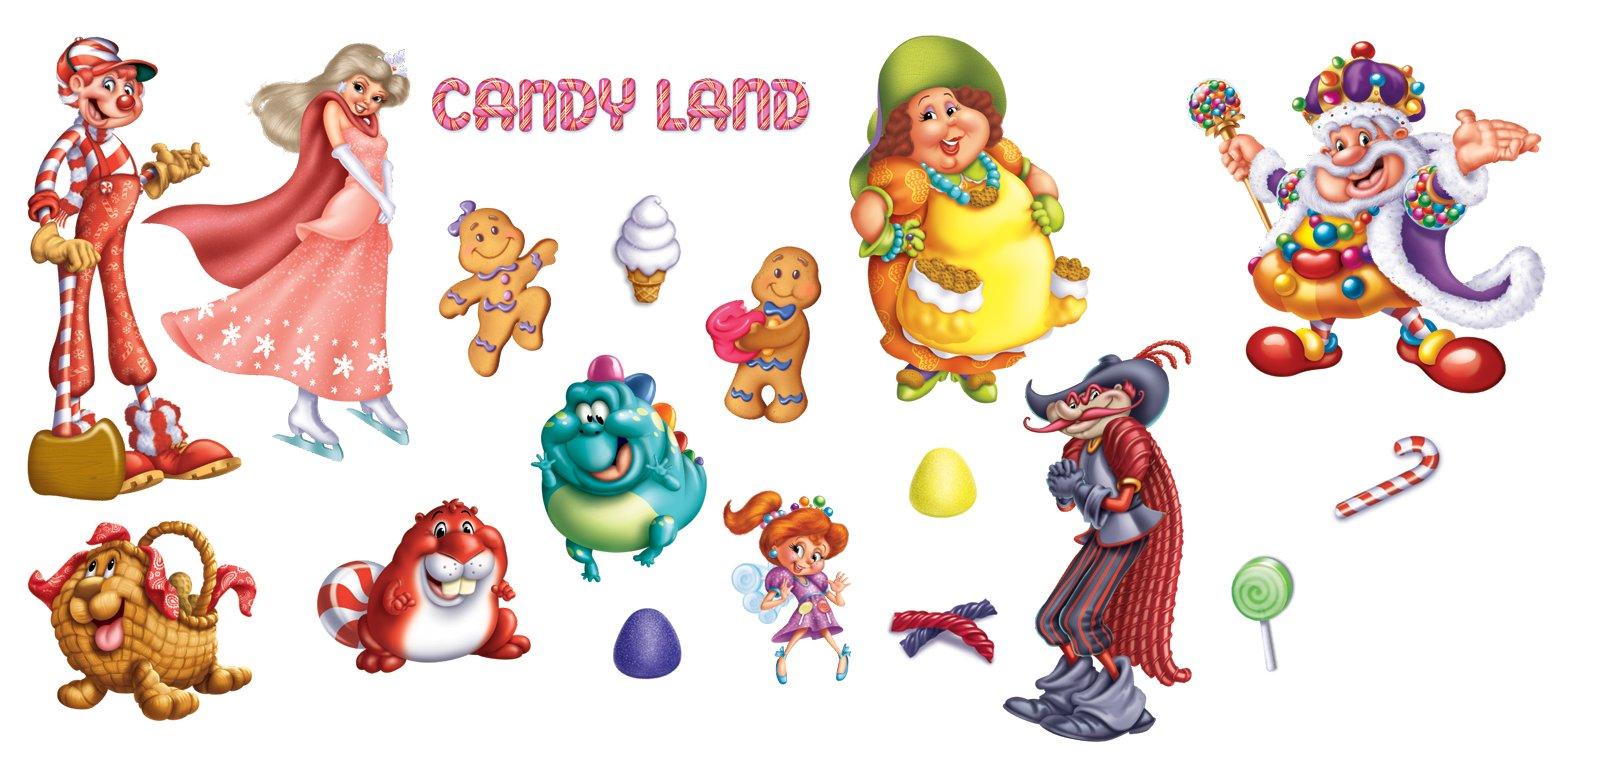 Candyland clipart printable. Free cliparts download clip